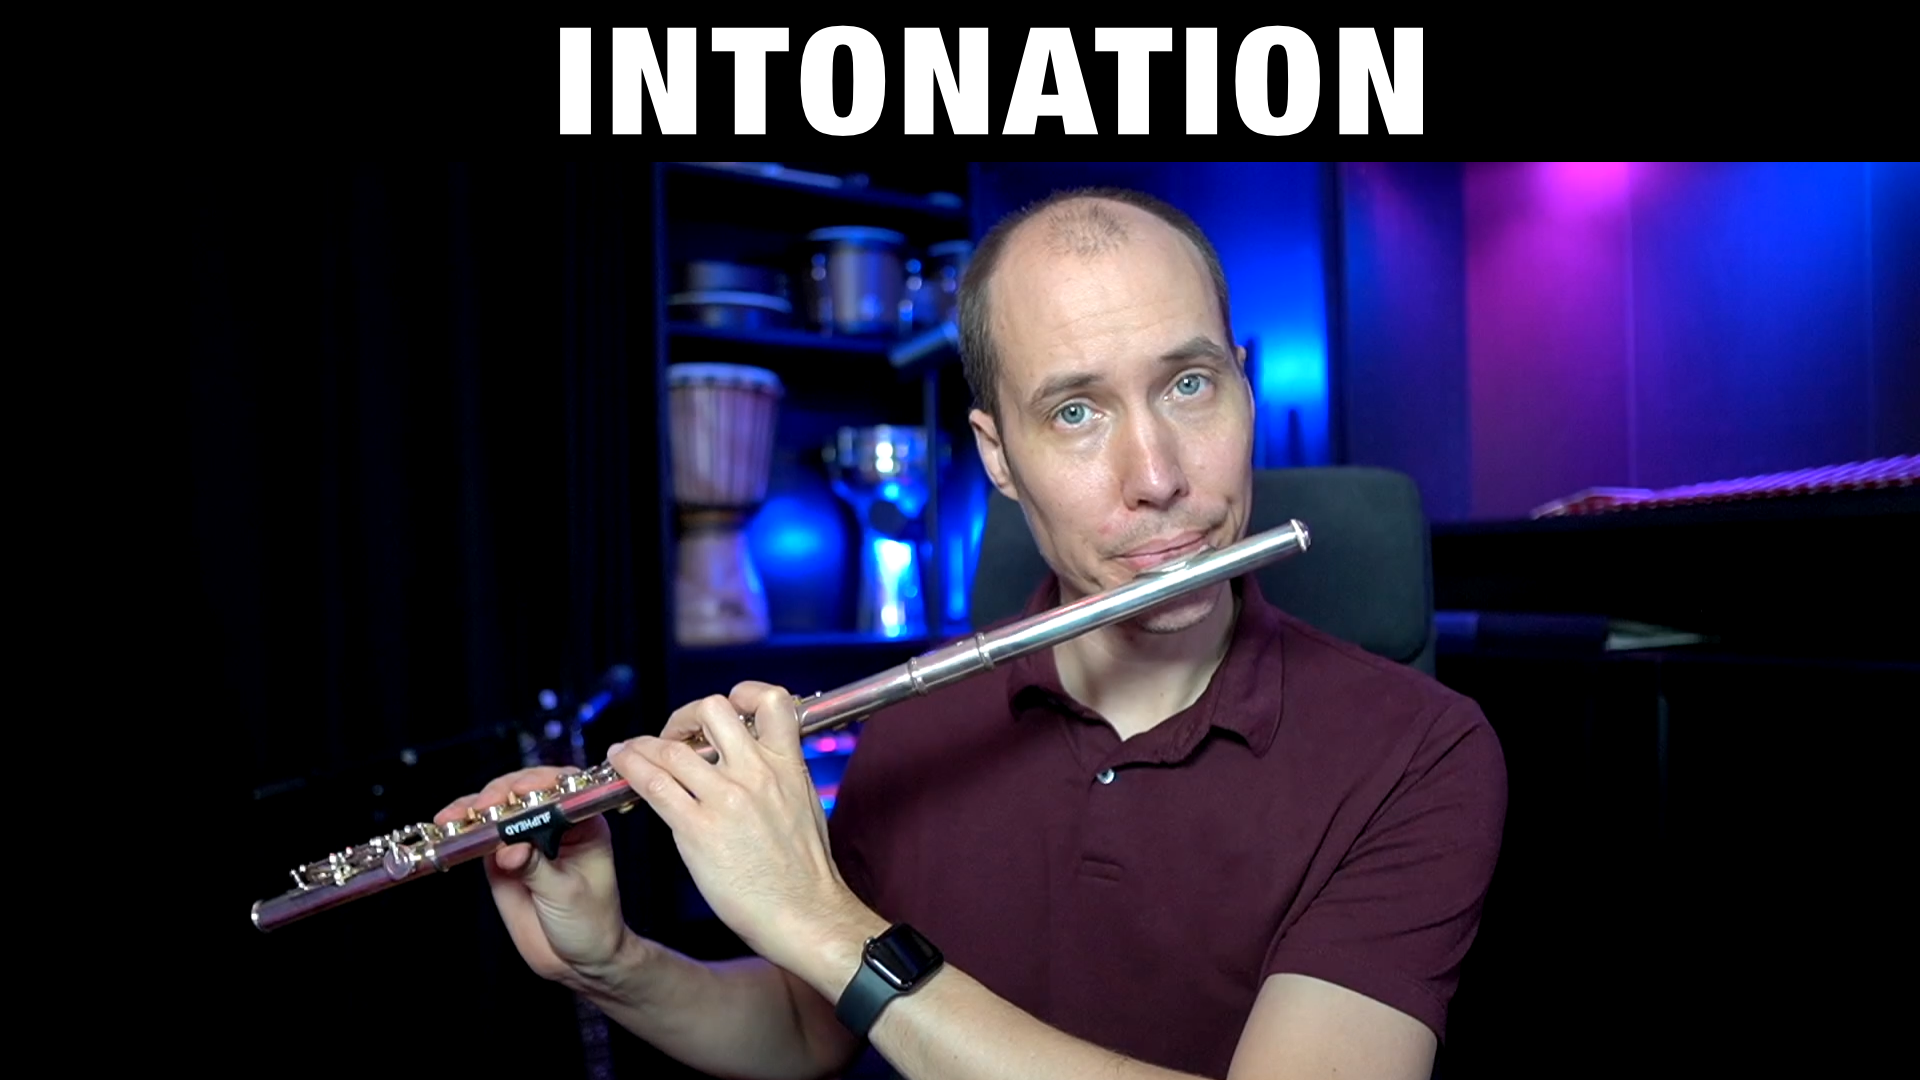 How to Improve Intonation on Your Instrument